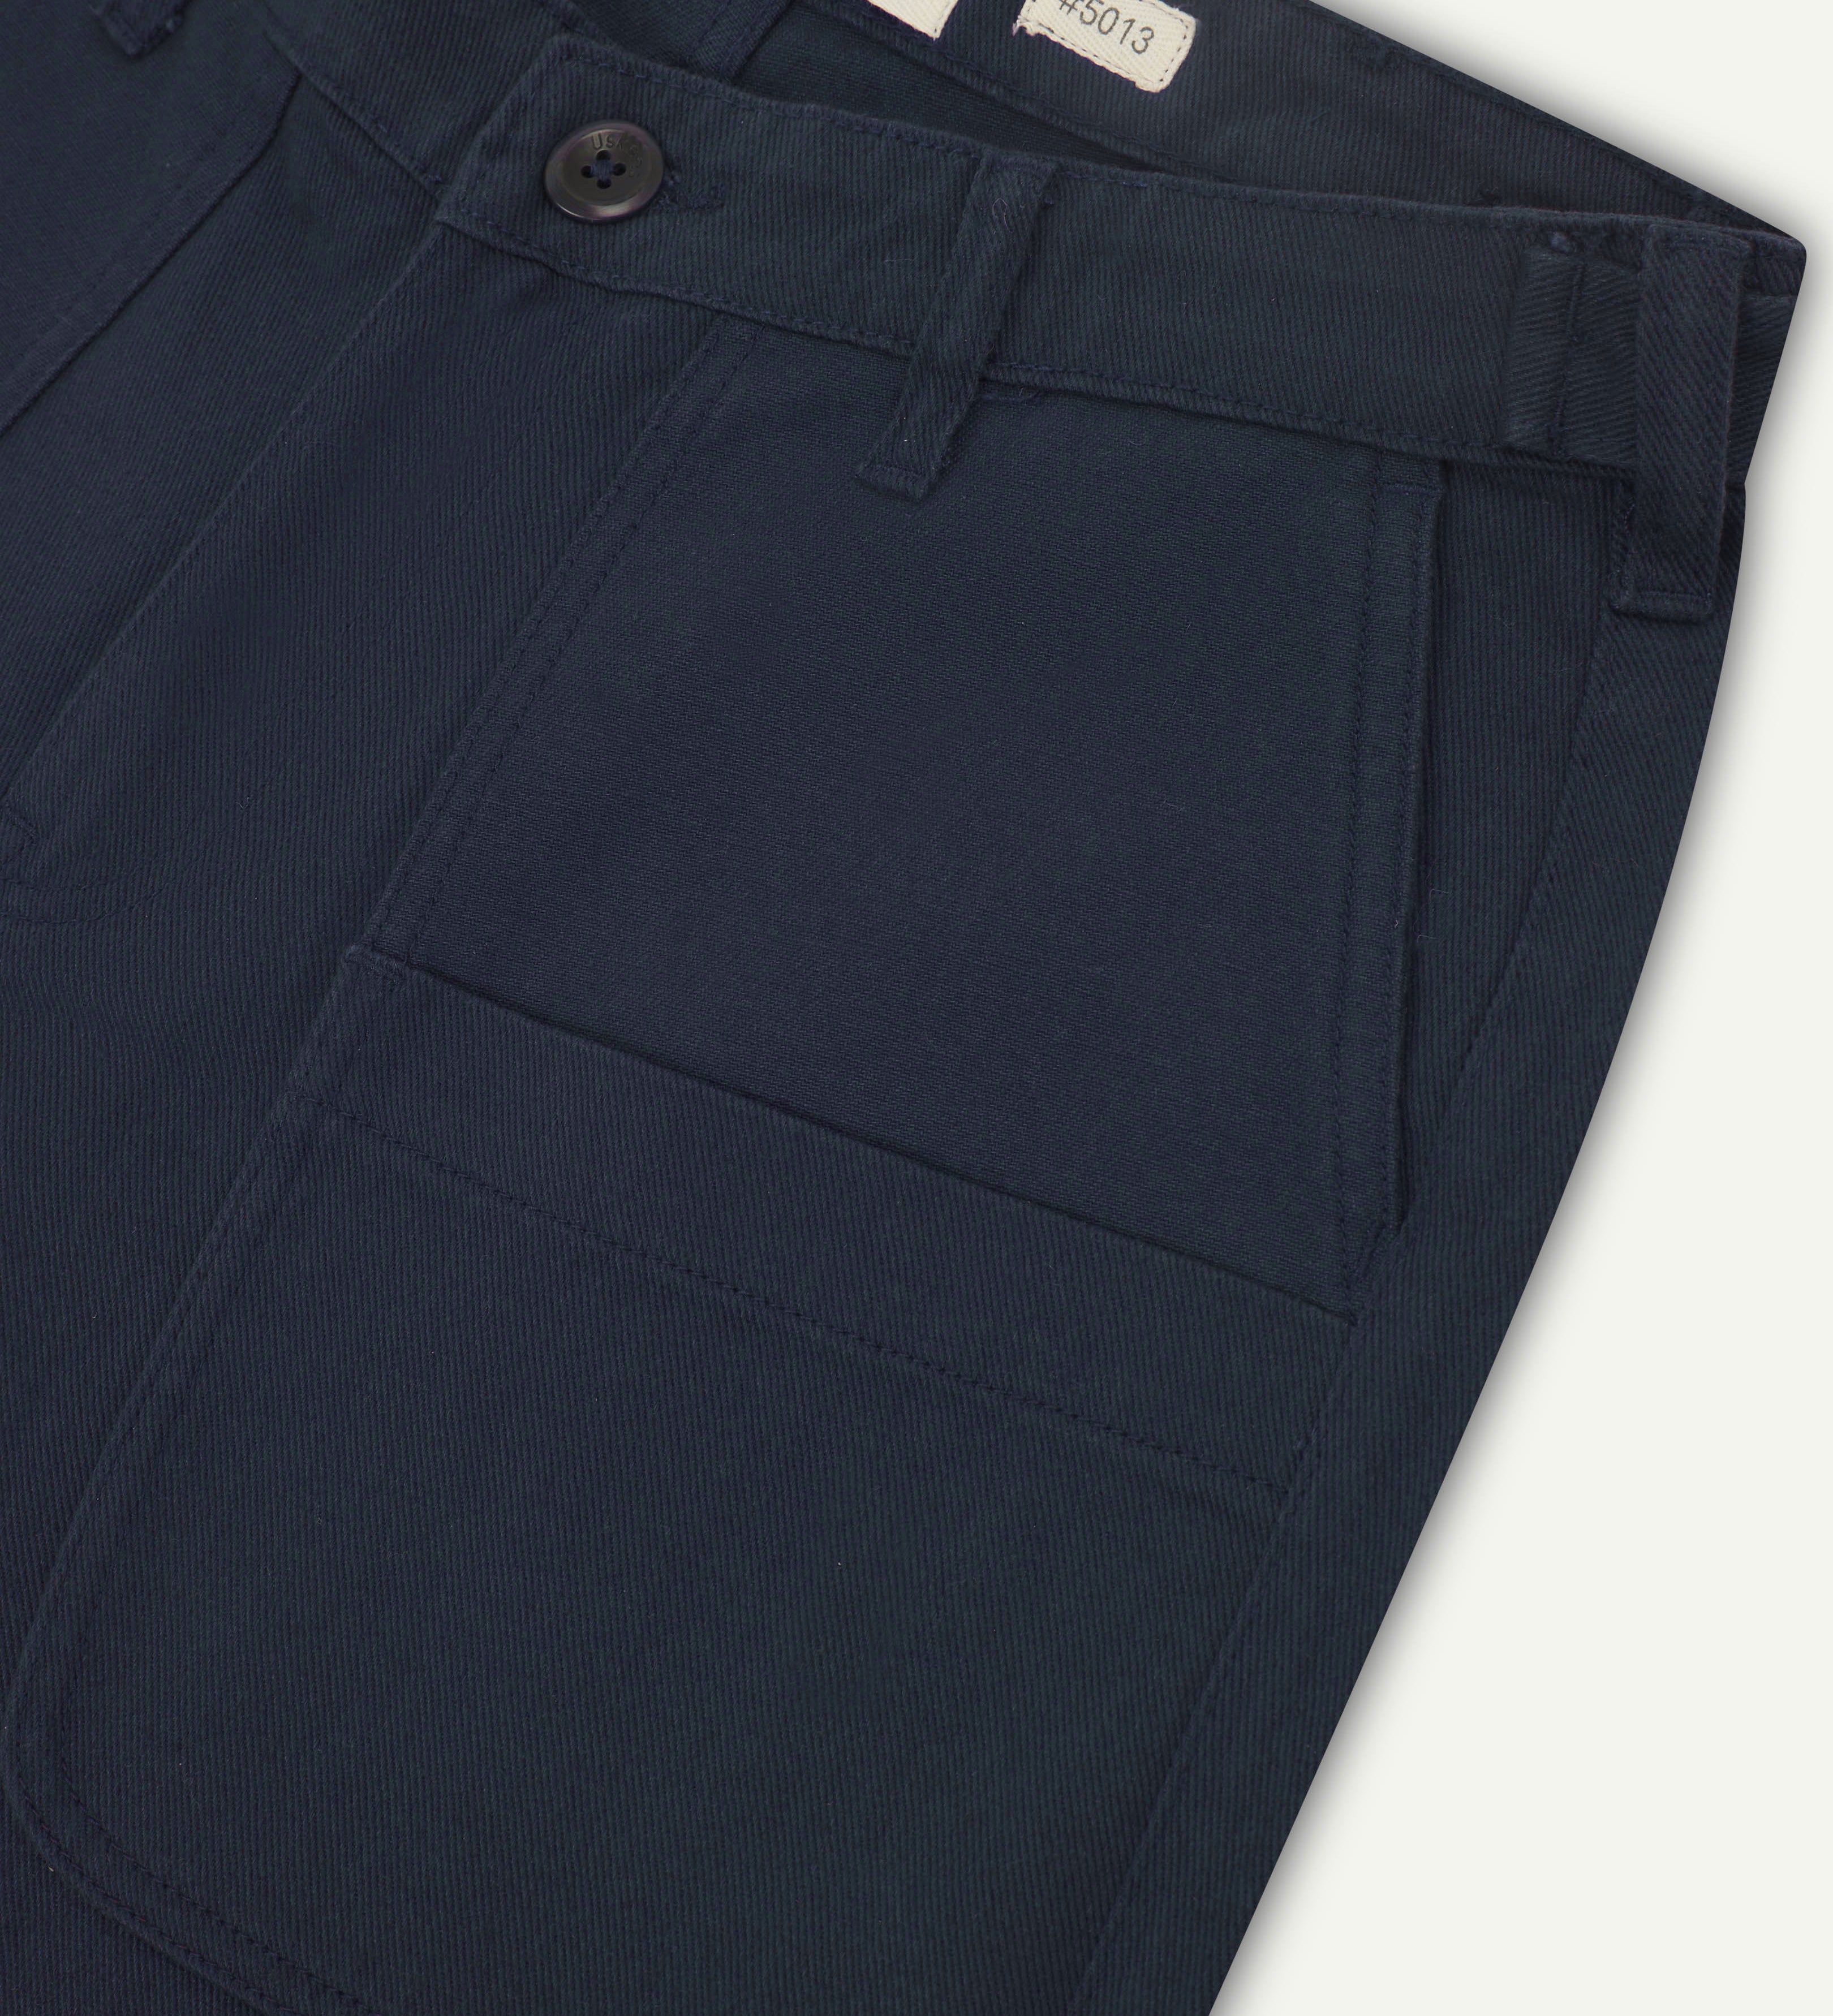 Close up shot of uskees #5013 drill men's trousers showing pocket and waistband detail